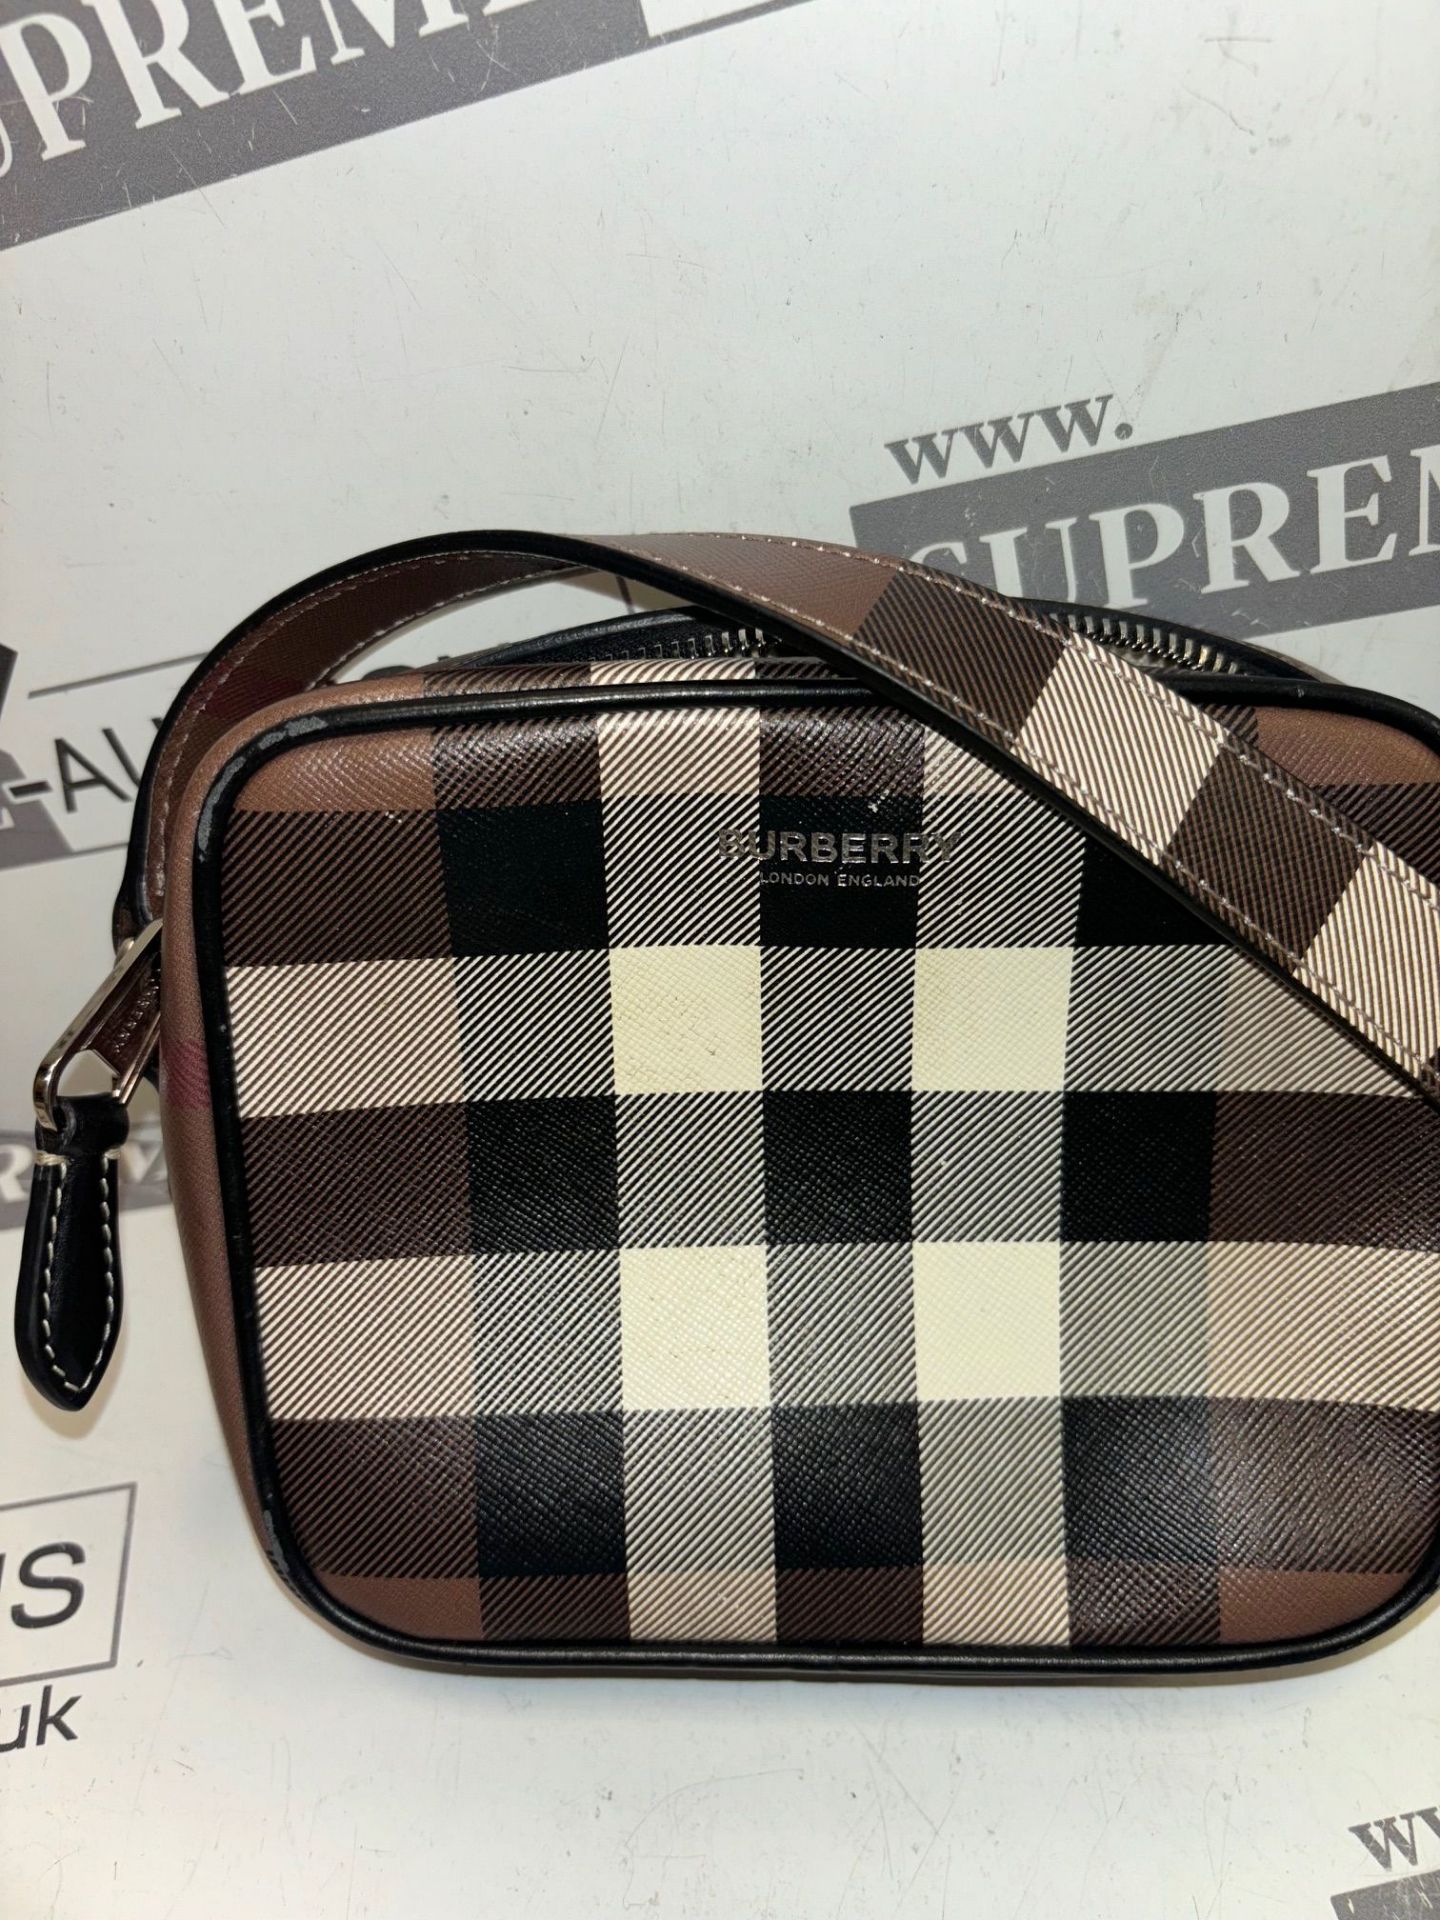 Burberry Shoulder Bag Check Coated Canvas Brown. 16x13cm. - Image 8 of 9